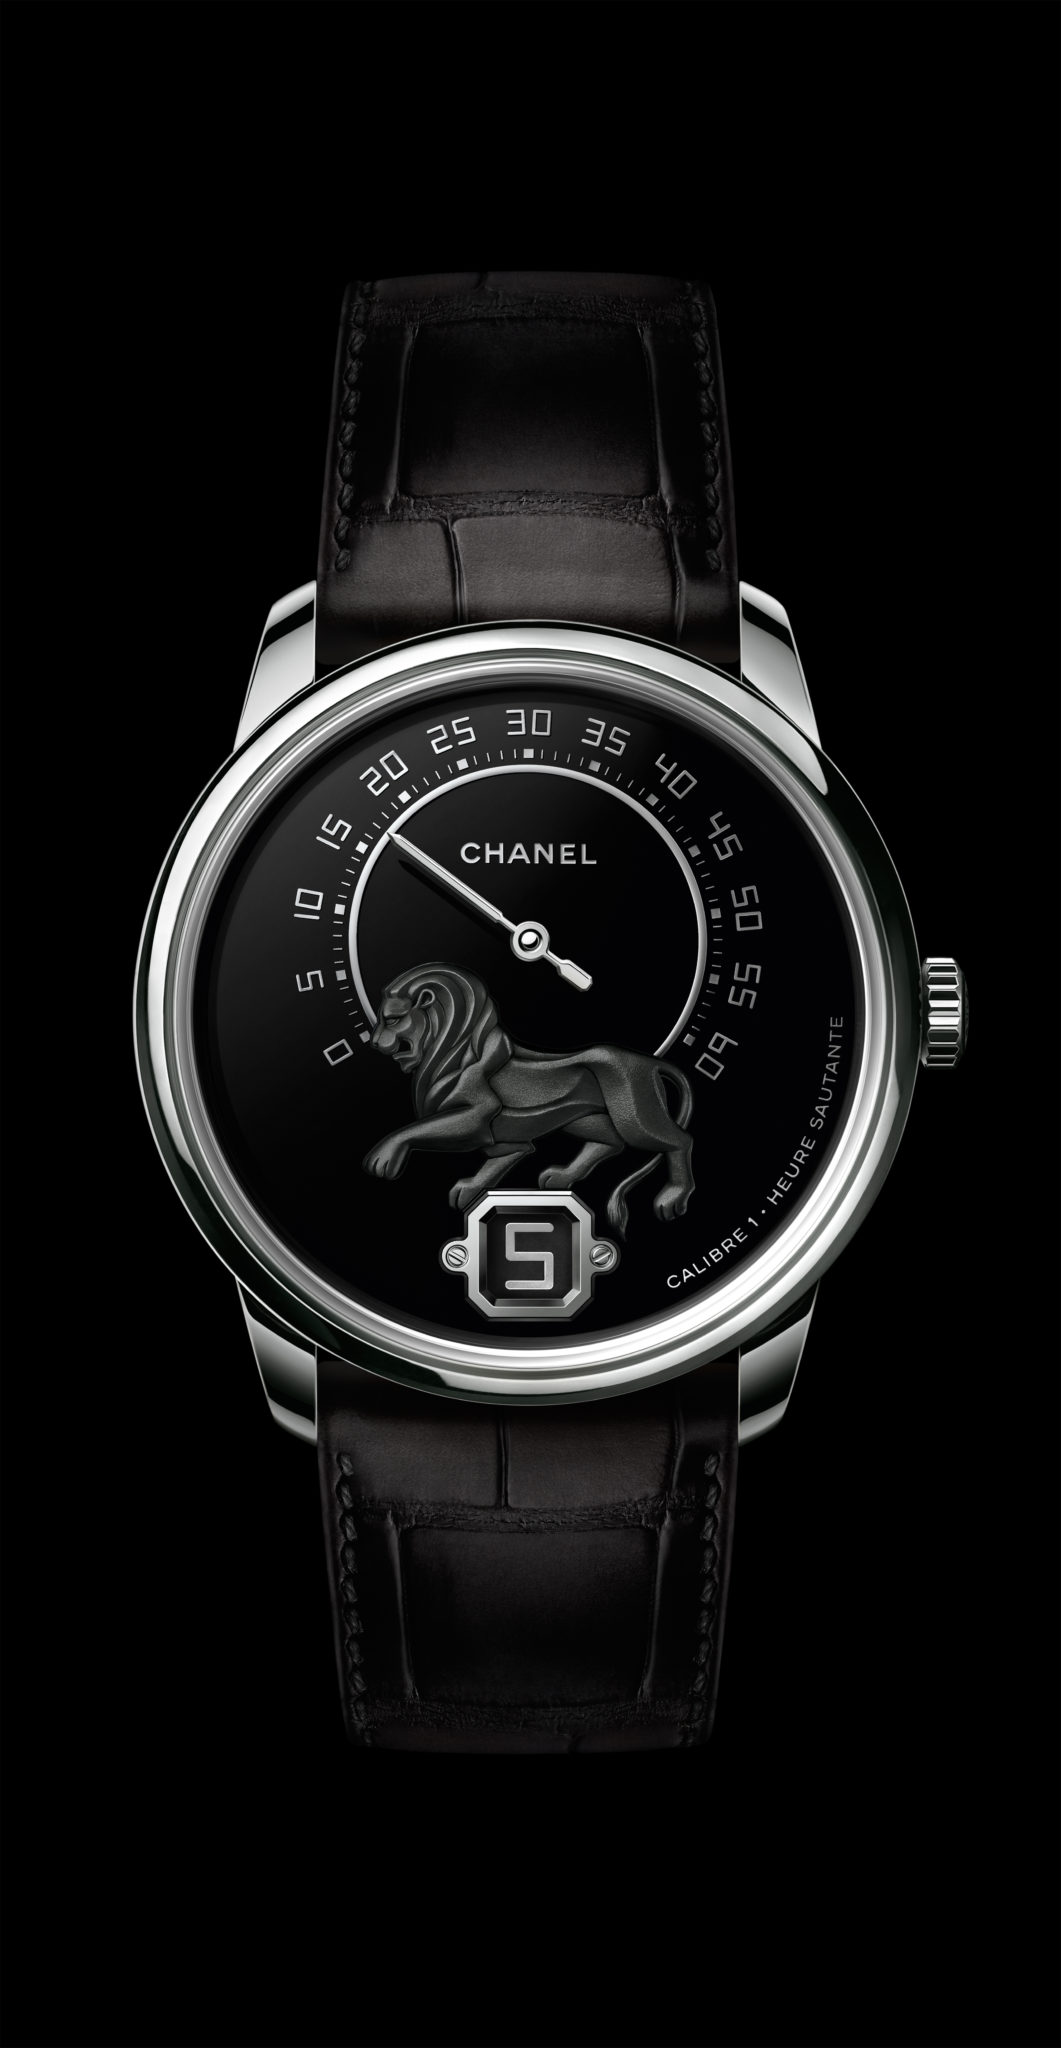 Chanel Diamonds, Karl and Mademoiselle Privé – Great Magazine of Timepieces